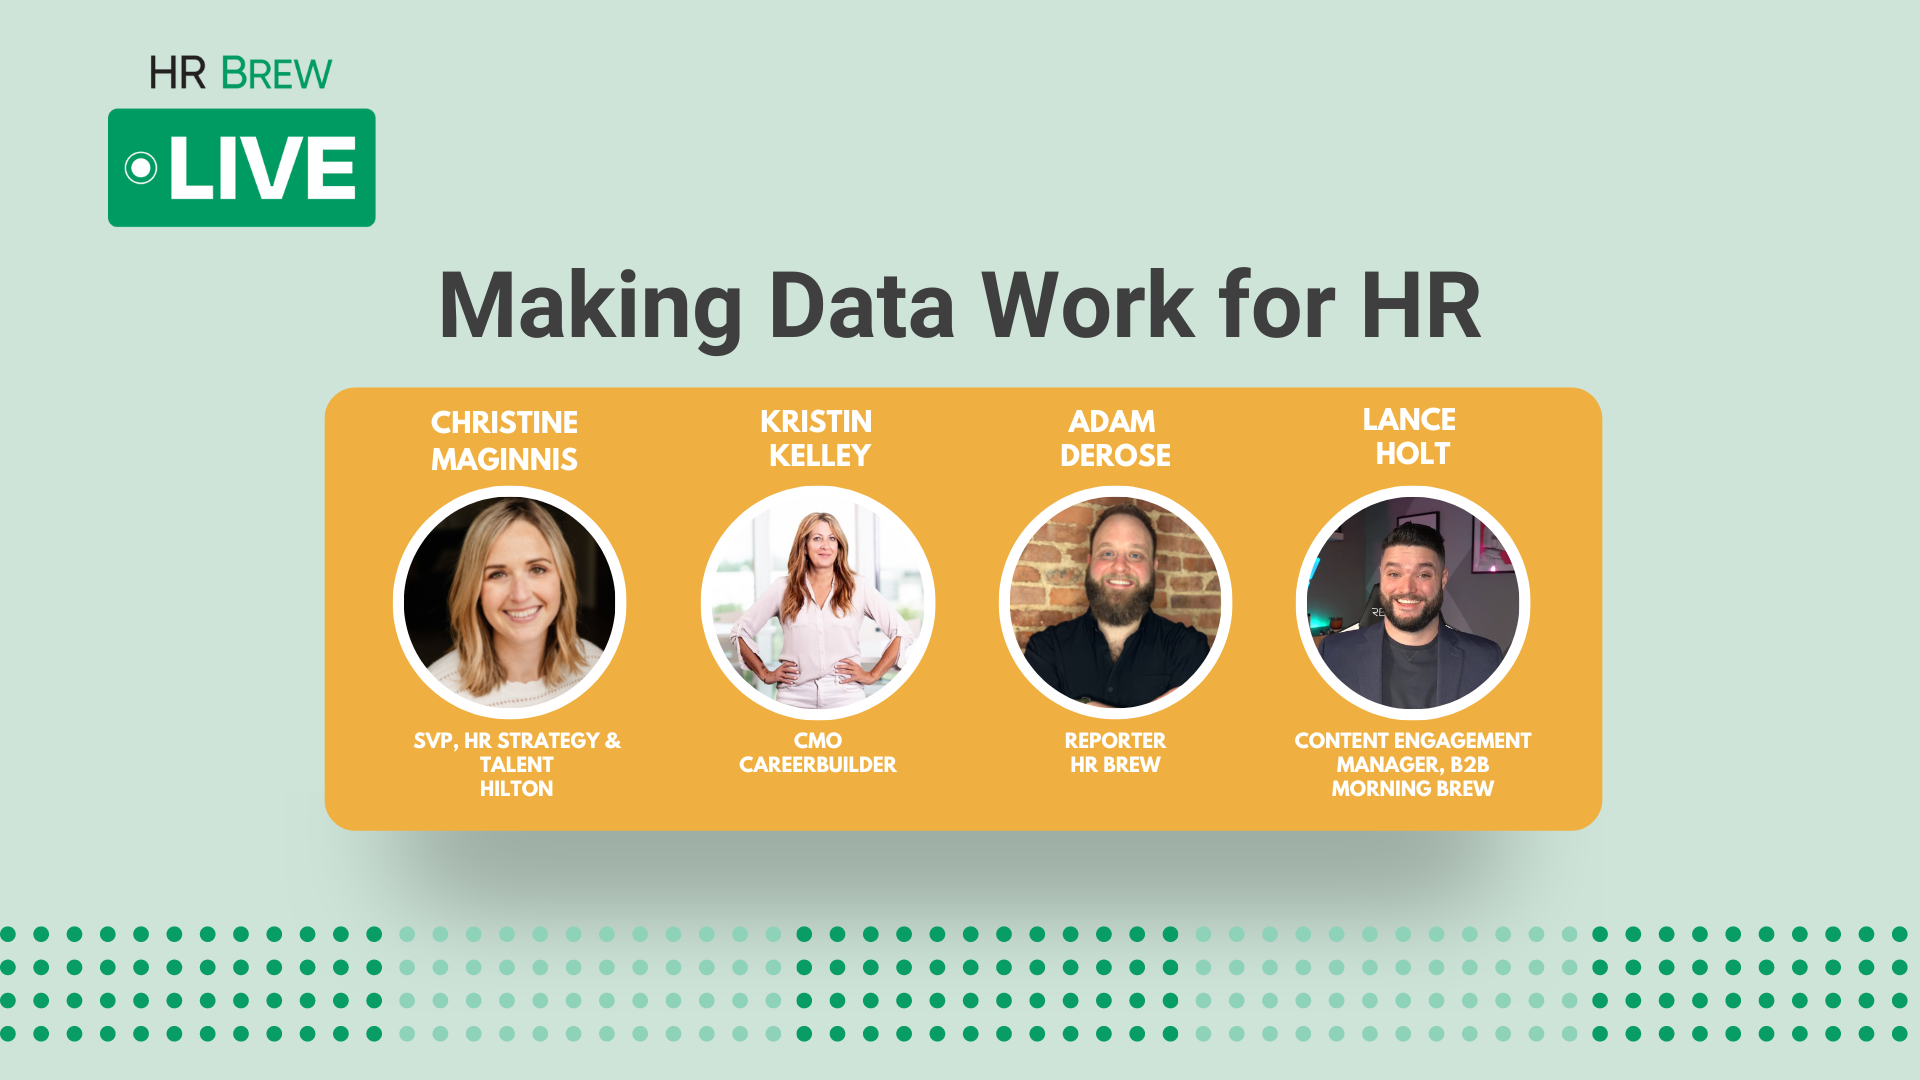 HR Brew Live logo with "Making Data Work for HR" text above four people's headshots on a light green background